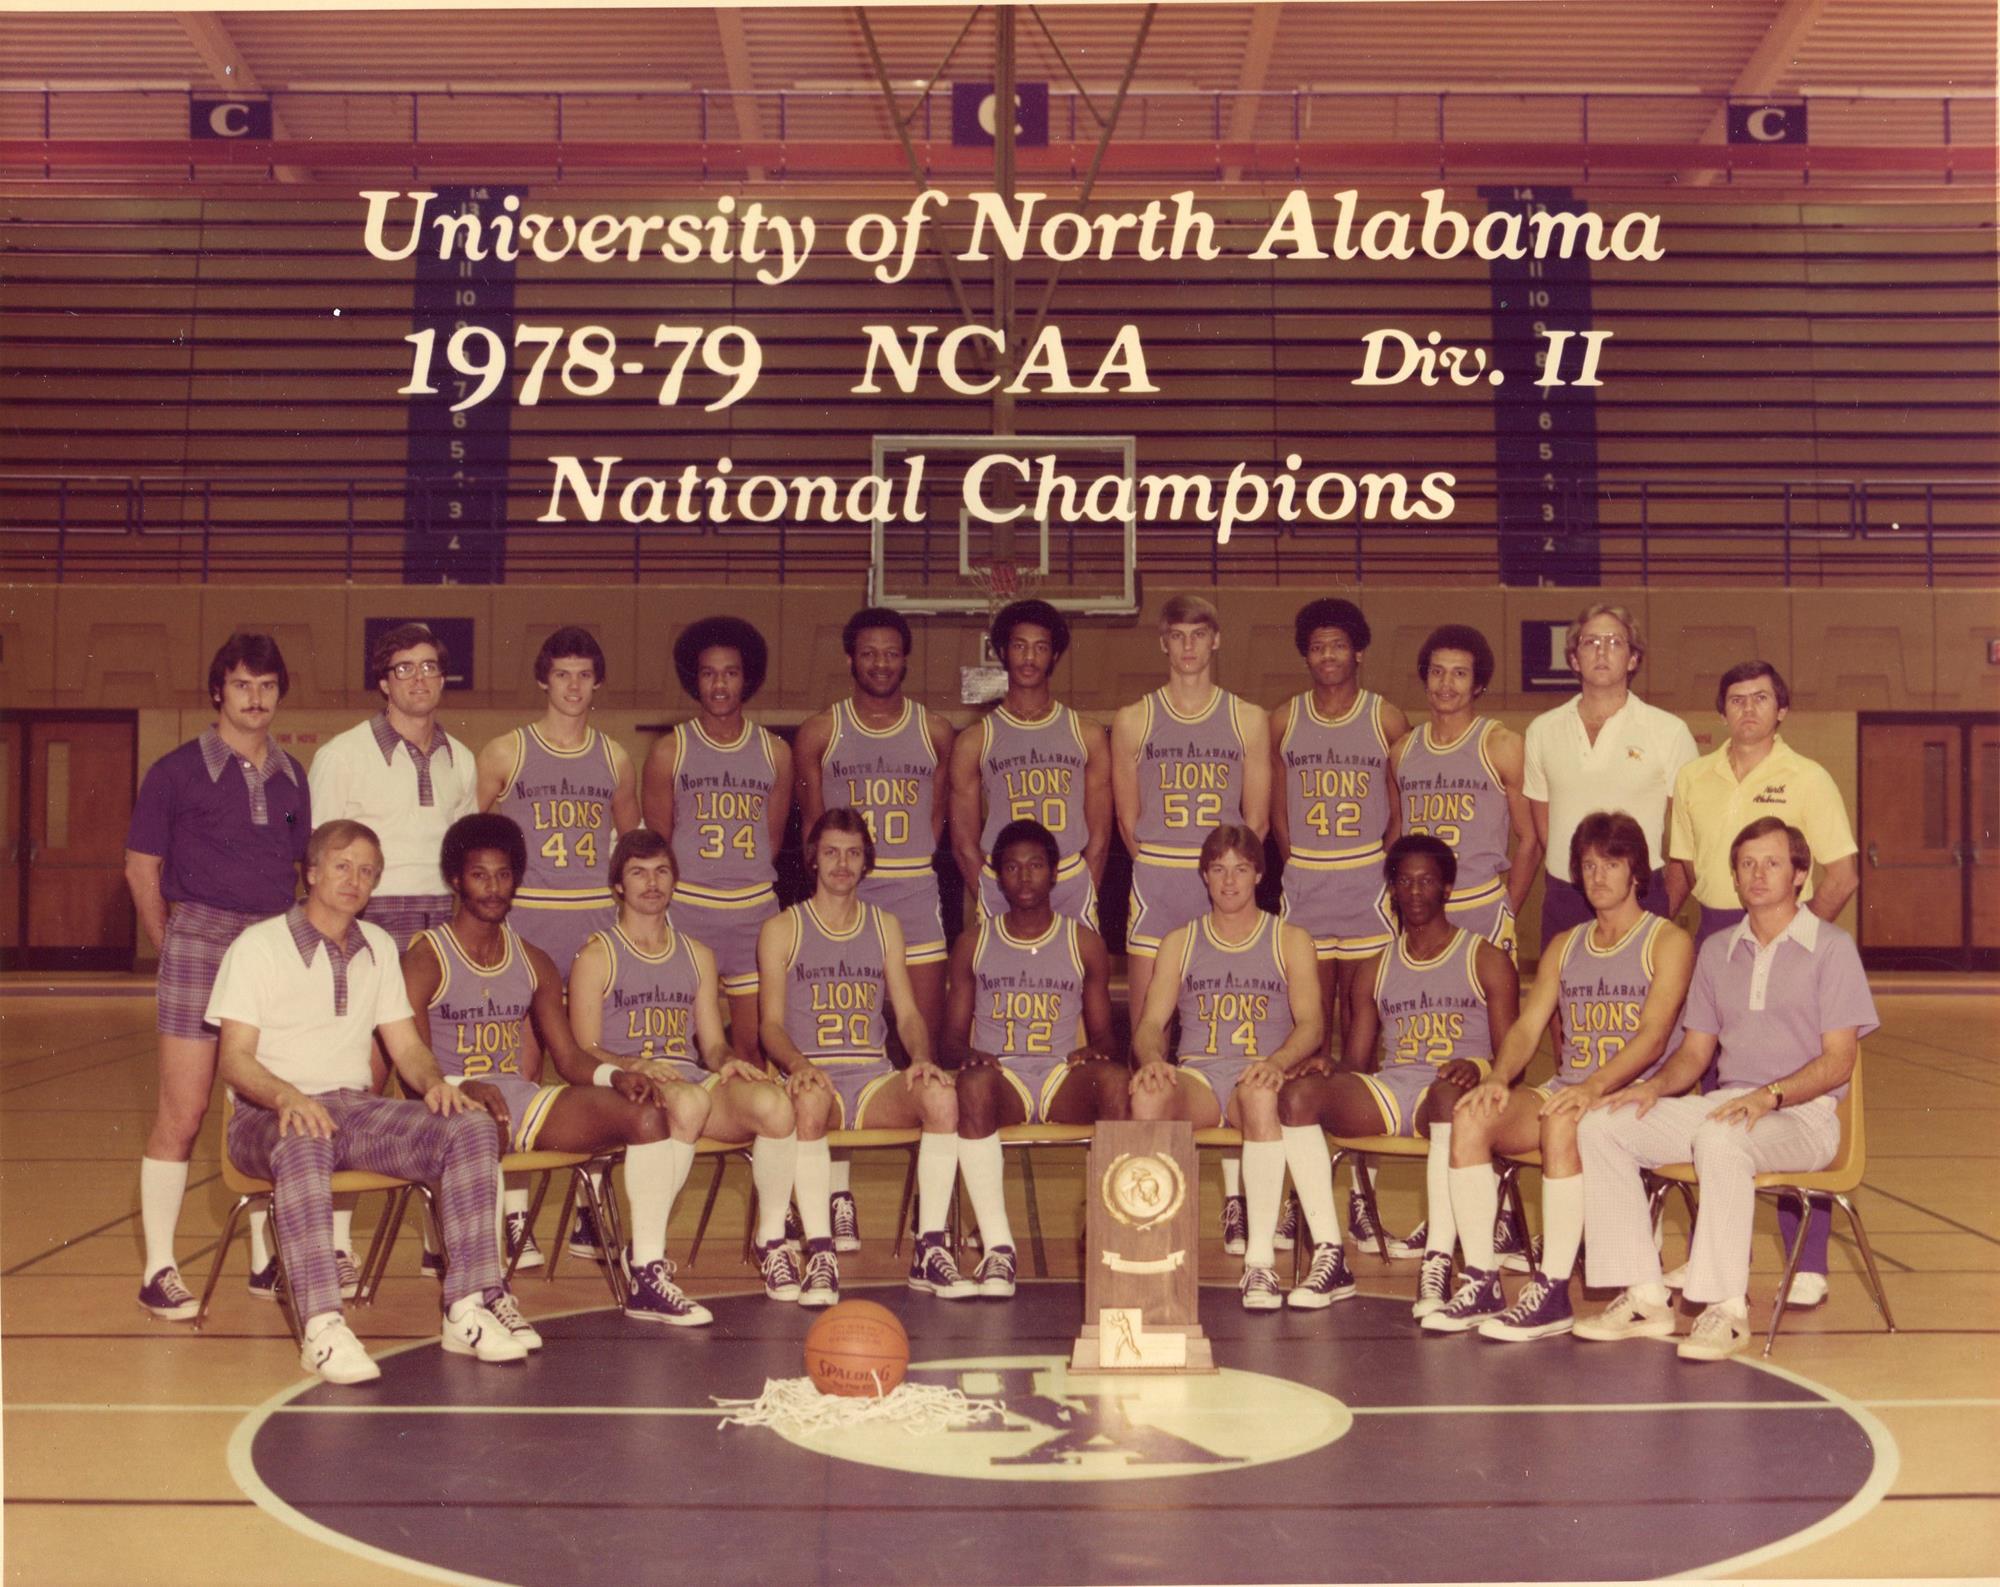 1979: The UNA Lions win their first NCAA Division II national championship